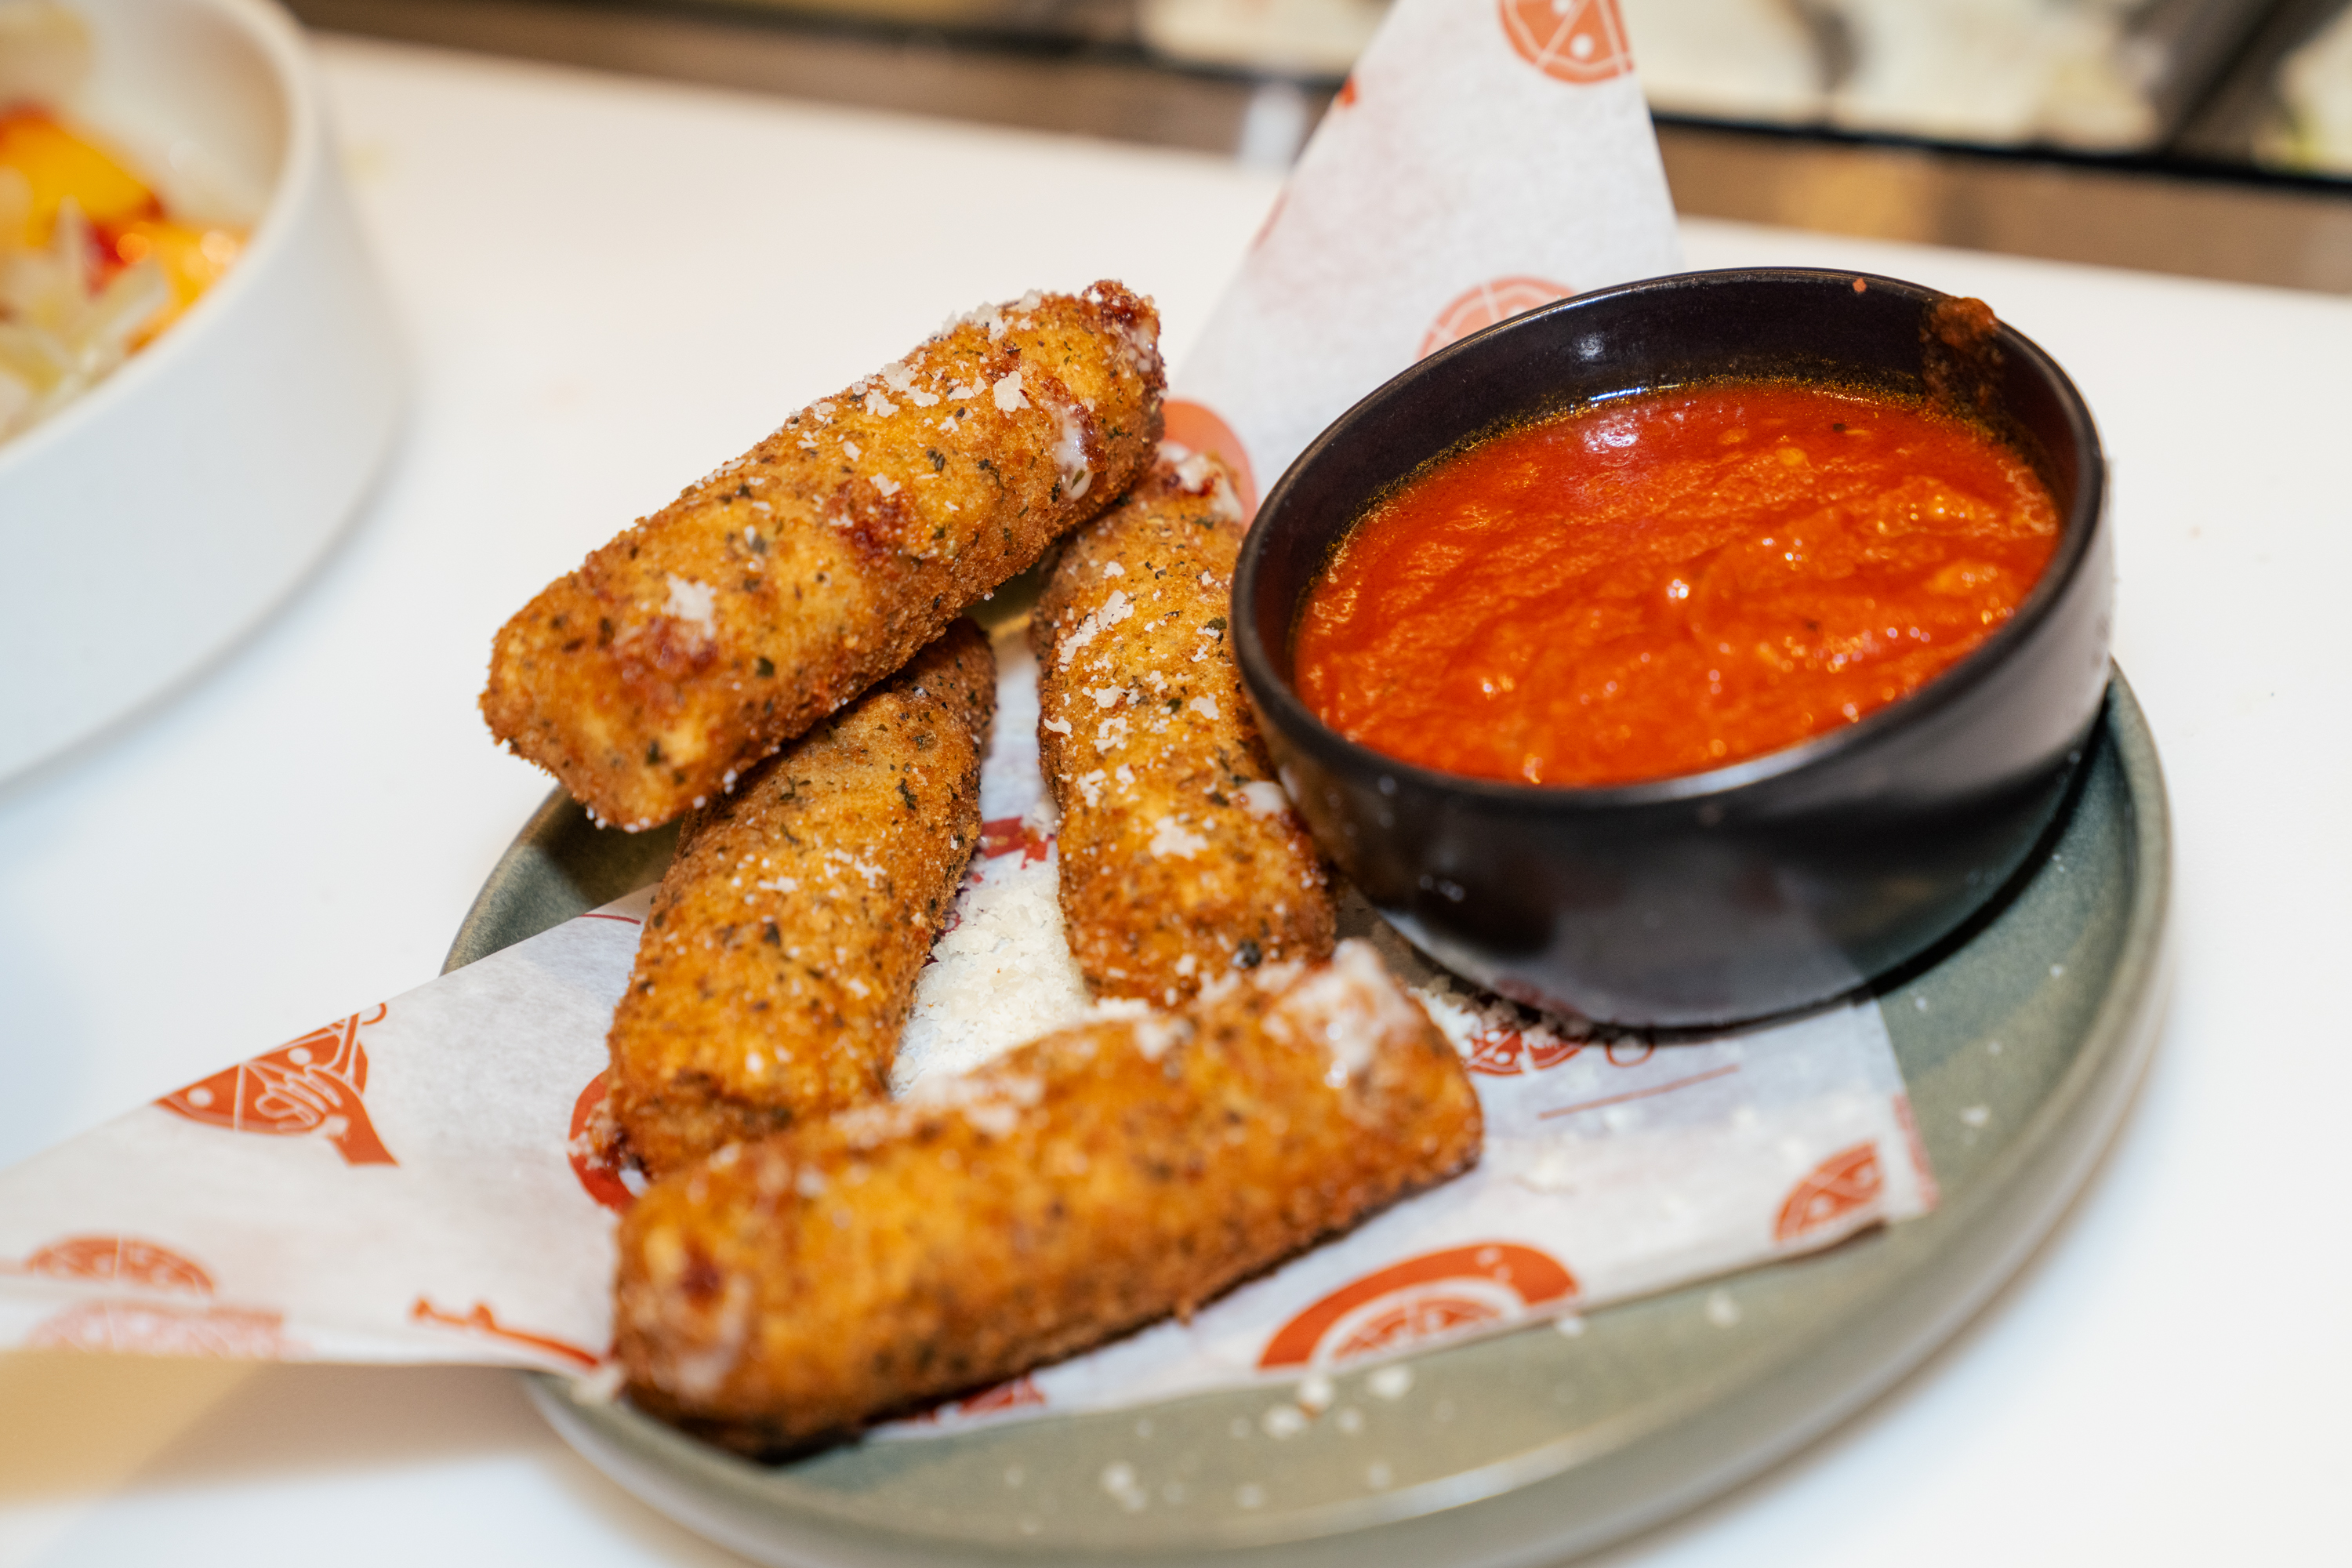 Fresh mozzarella sticks are a standout item on the sides menu at Flour + Water Pizzeria and required hours of research to meet the high standards of Pollnow and McNaughton.